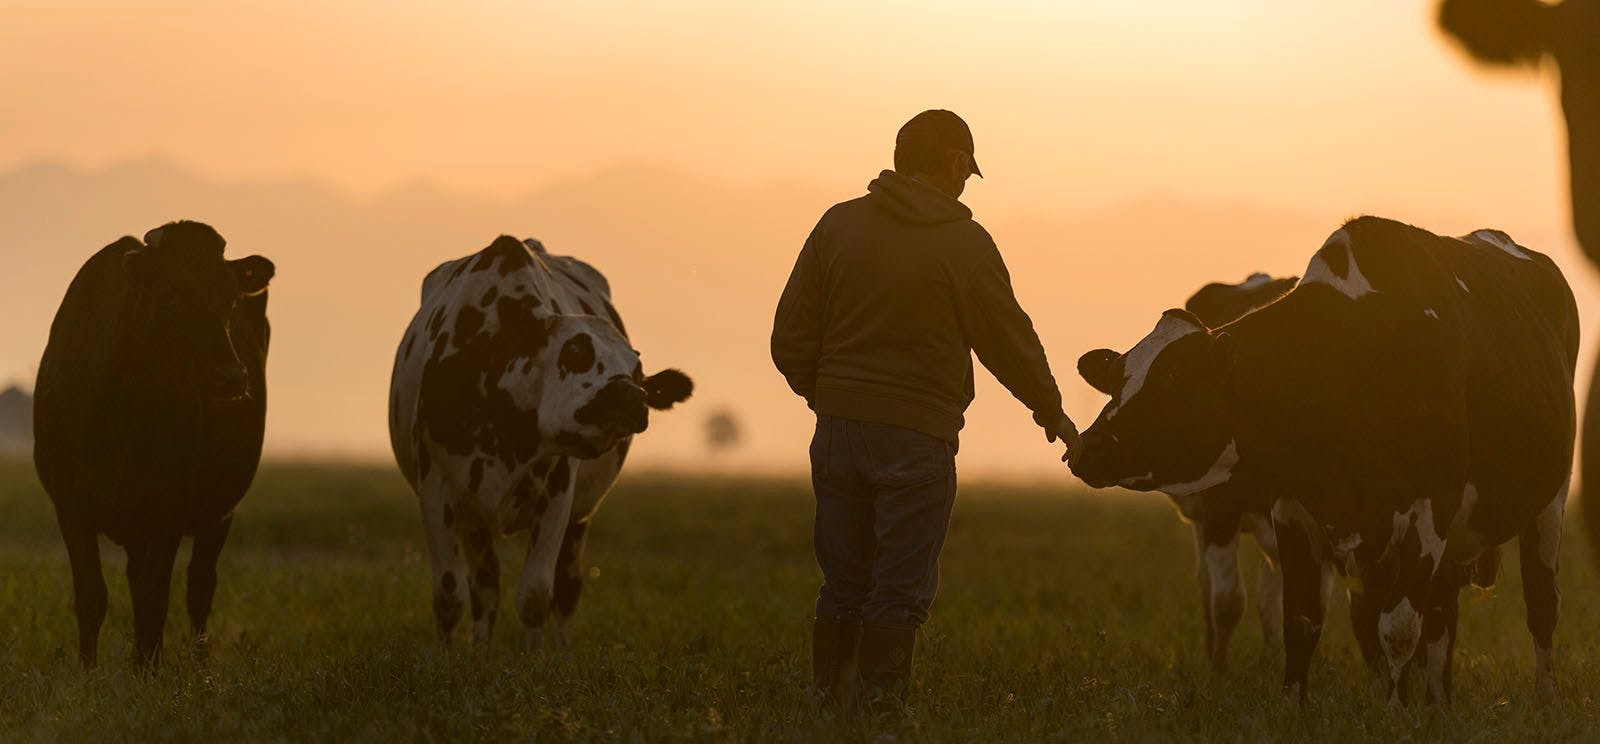 Organic Valley farmer showing some love to his cows in field at dusk.